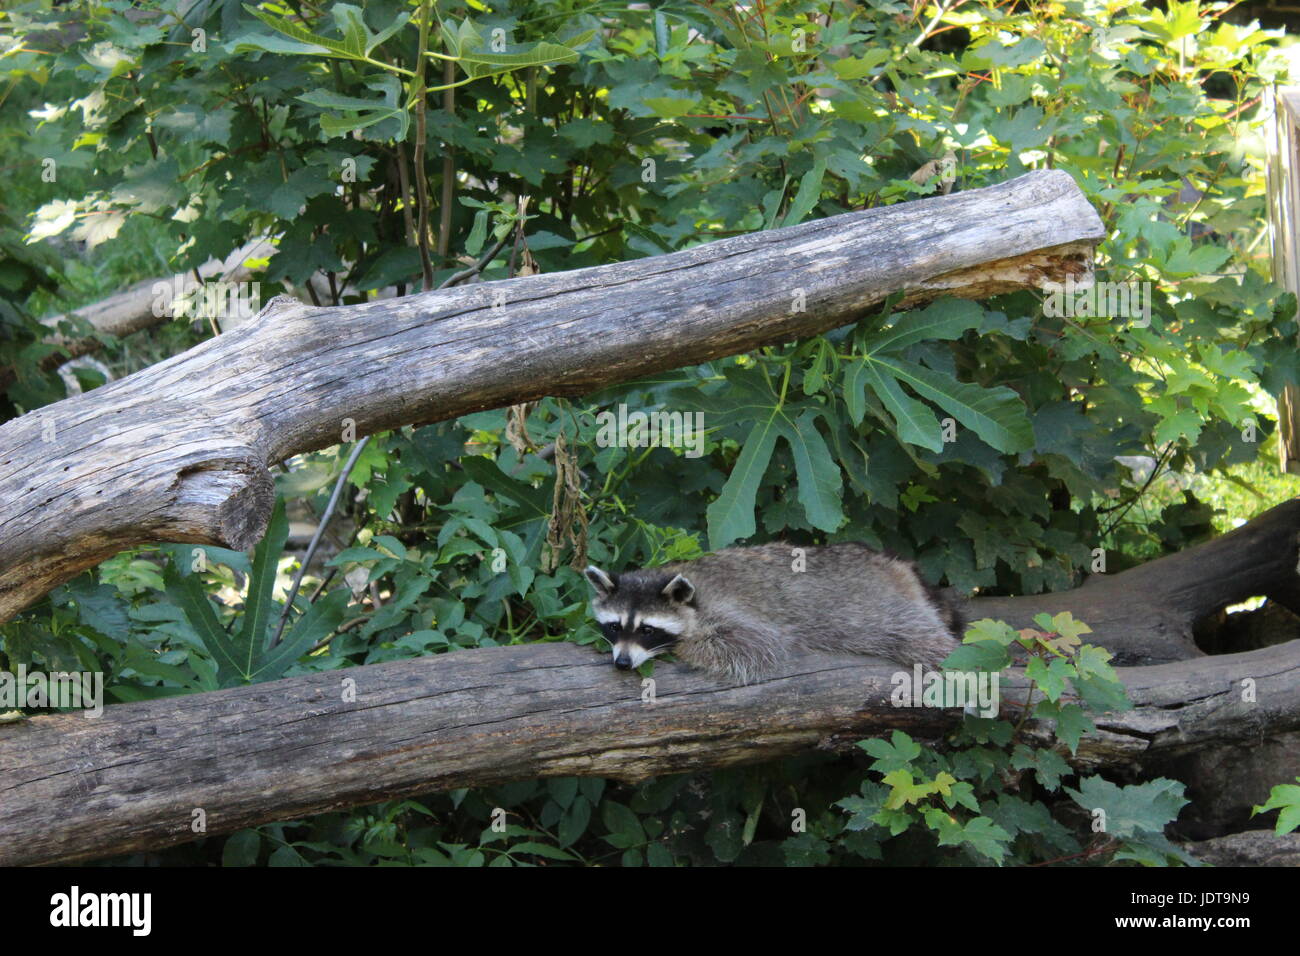 A cute raccoon sleeping peacefully on a fallen branch in nature. Stock Photo